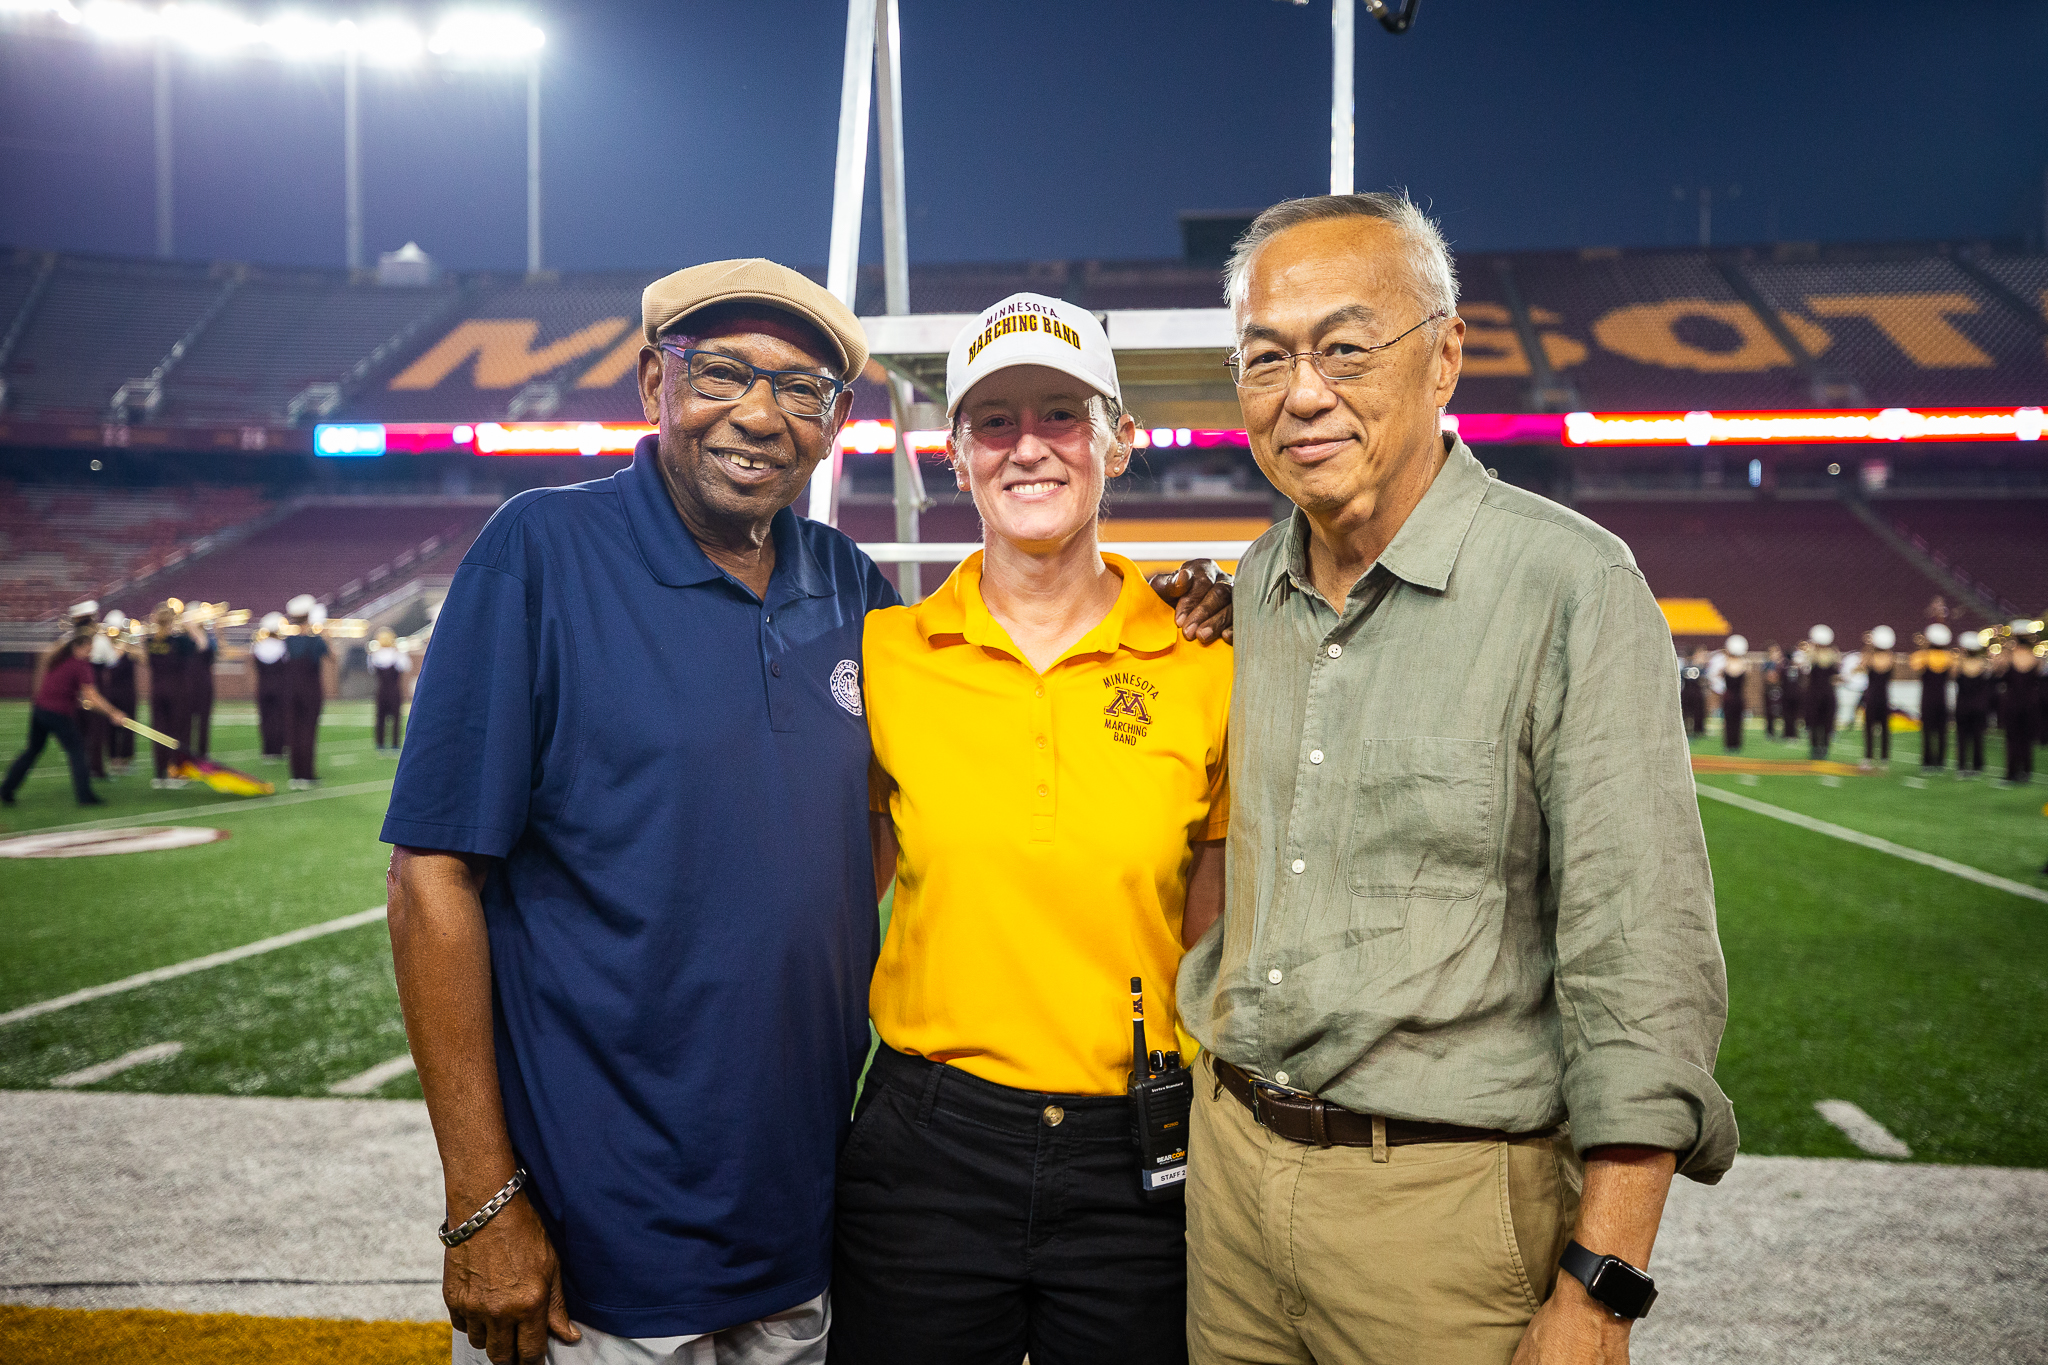 Sanford poses with Marching Band Director Betsy McCann and David Moy